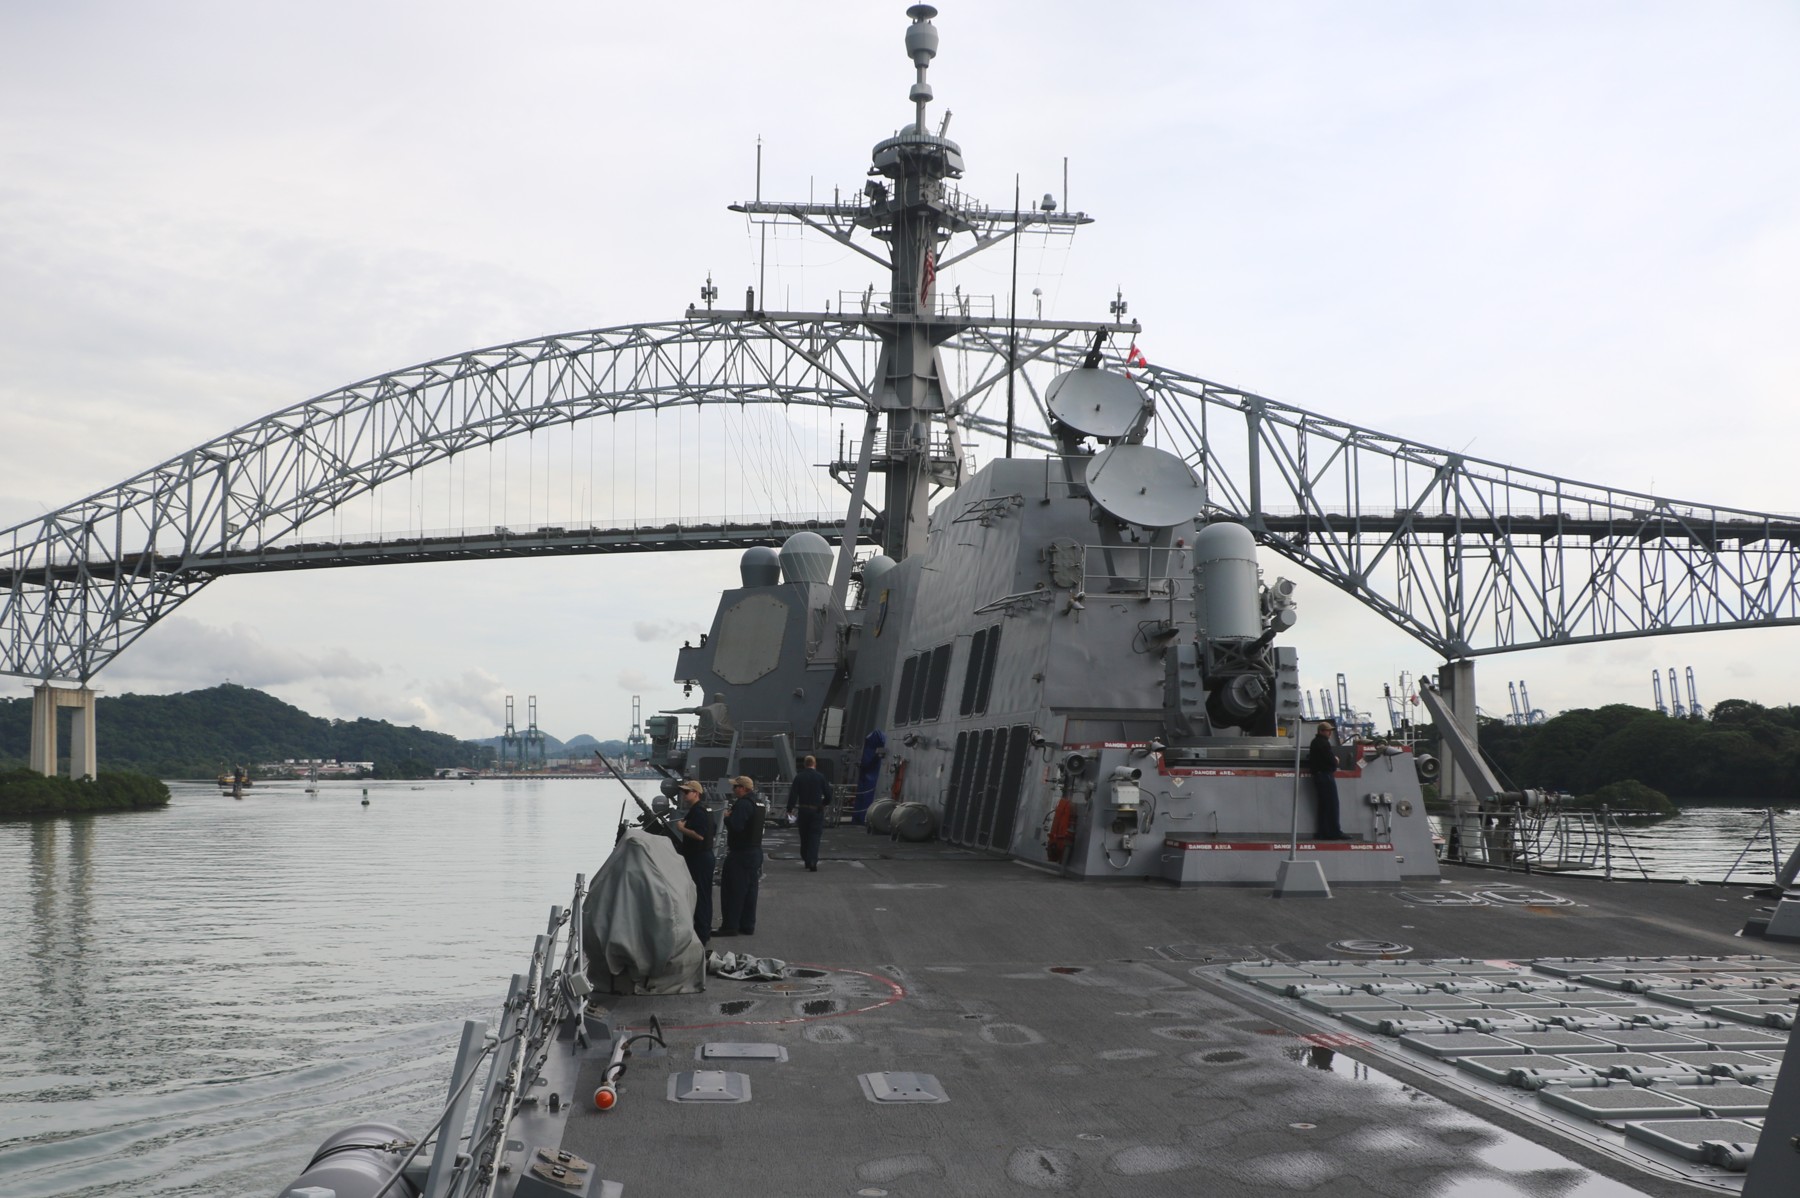 ddg-101 uss gridley arleigh burke class guided missile destroyer aegis us navy panama canal 57